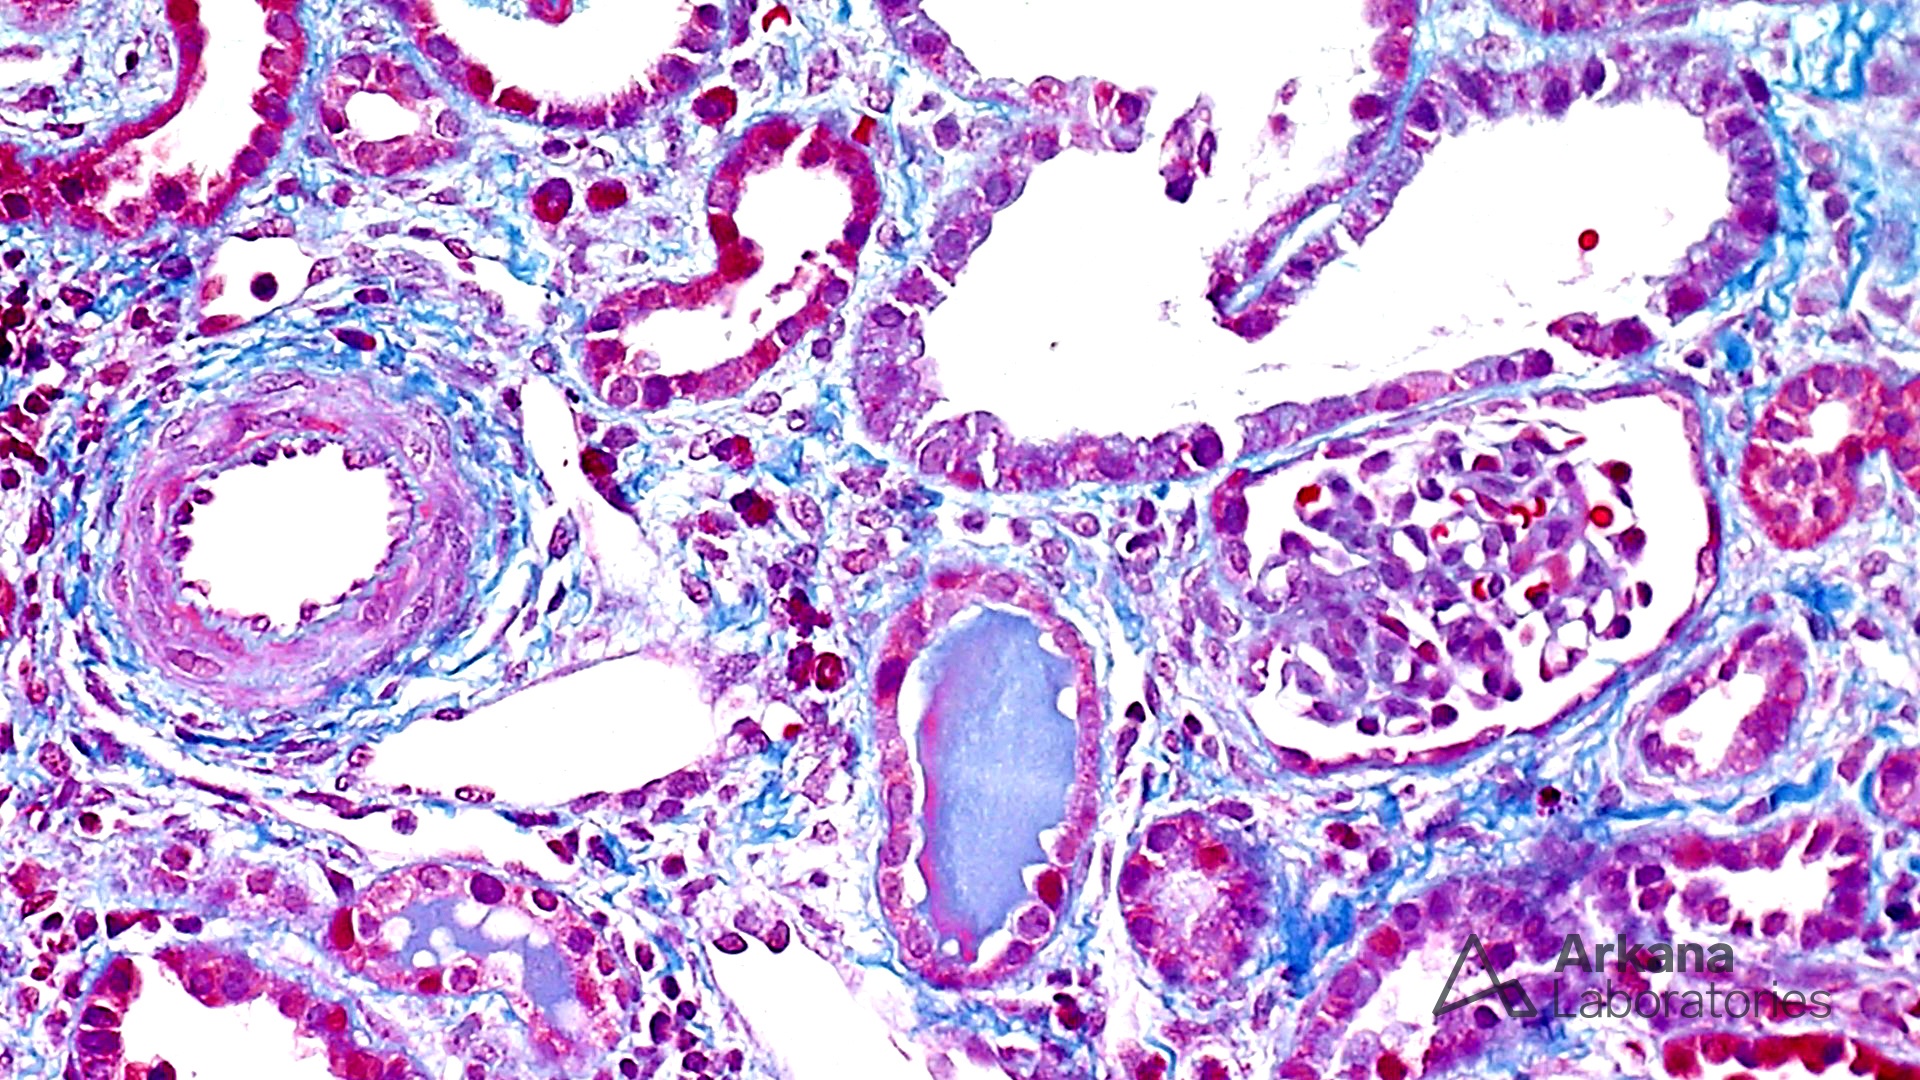 Trichrome stain showing Congenital Nephrotic Syndrome of the Finnish type (CNSF)